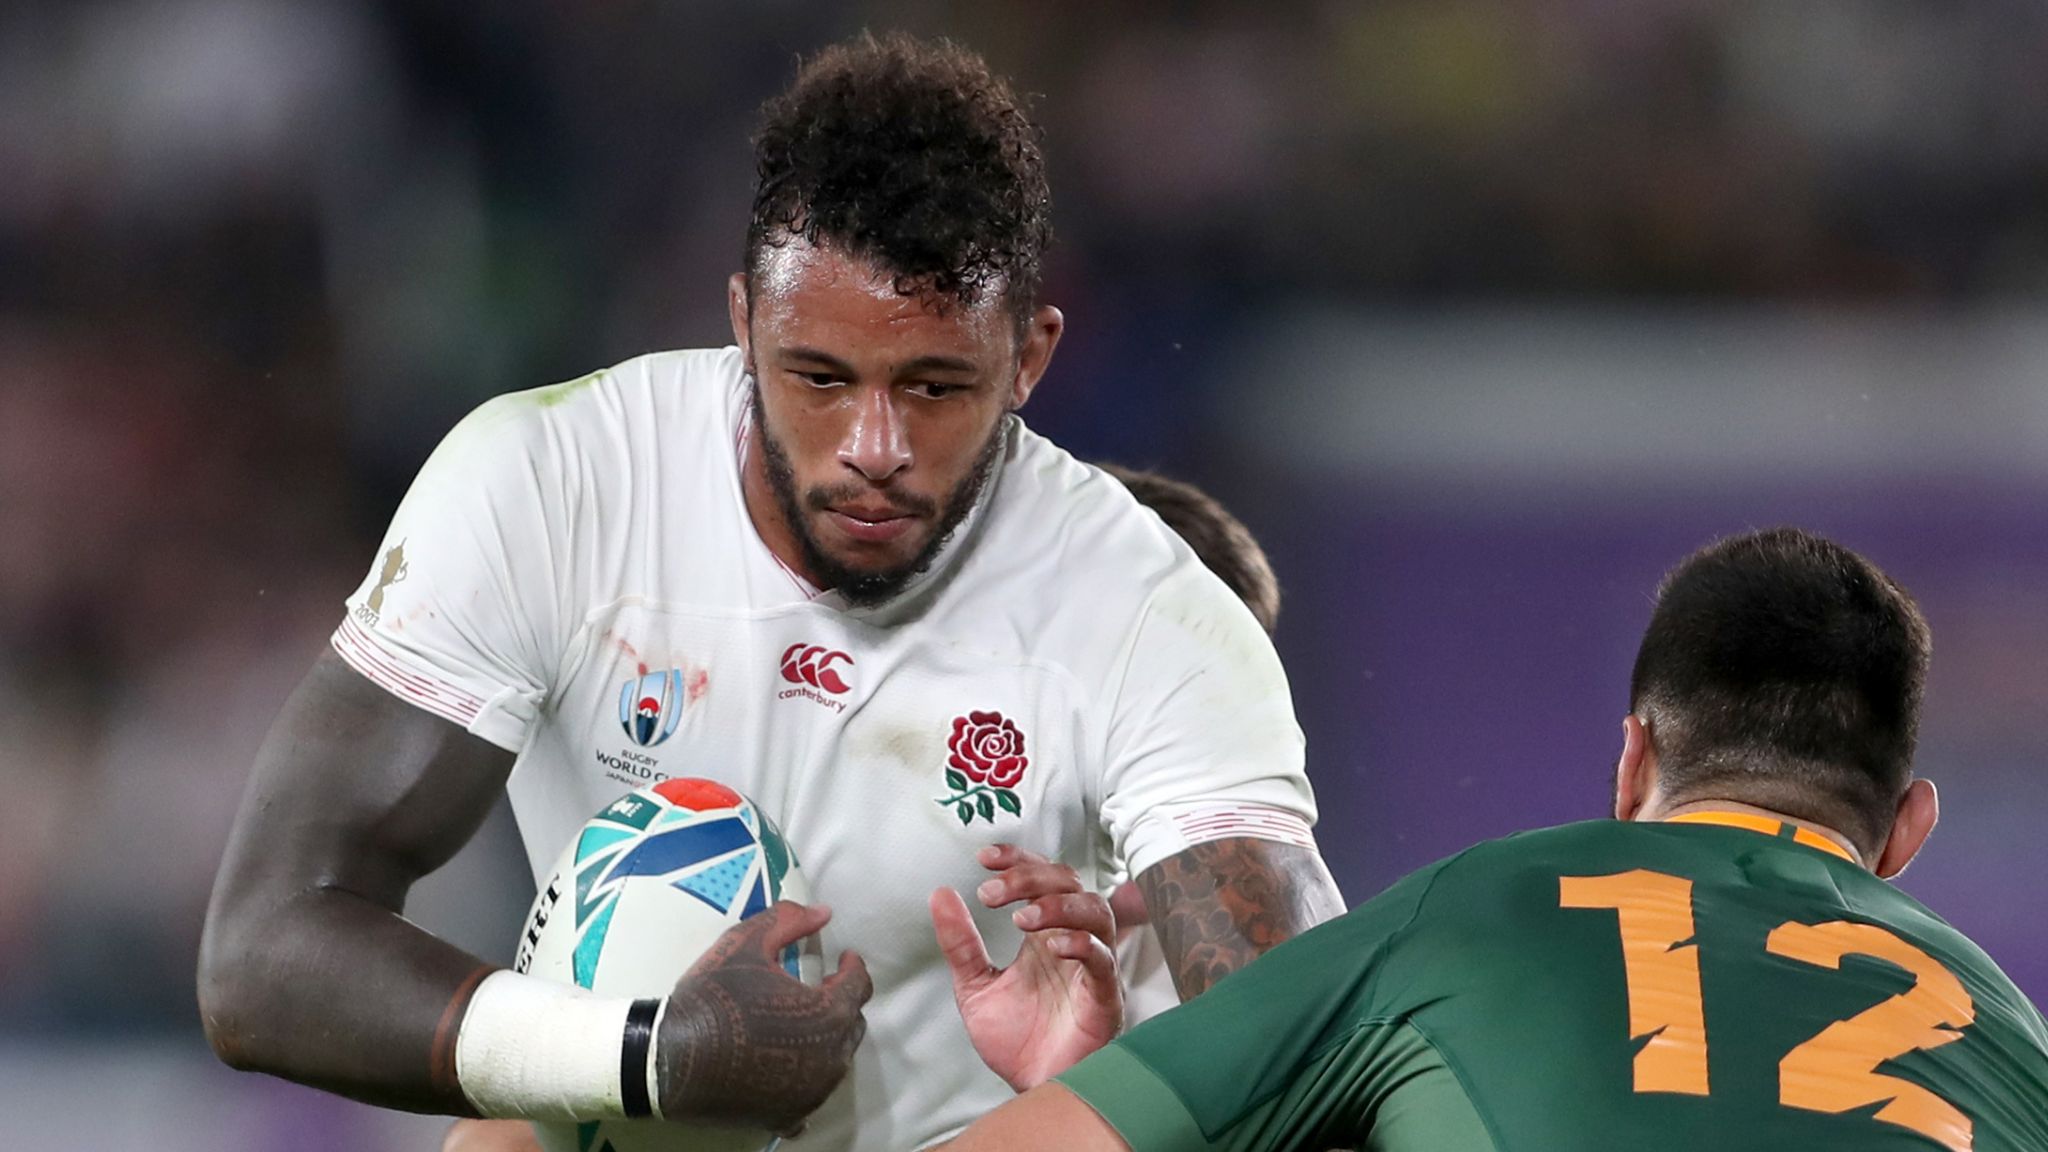 Courtney Lawes, Tom Curry and George Ford return to England Six Nations  squad for Wales fixture | Rugby Union News | Sky Sports